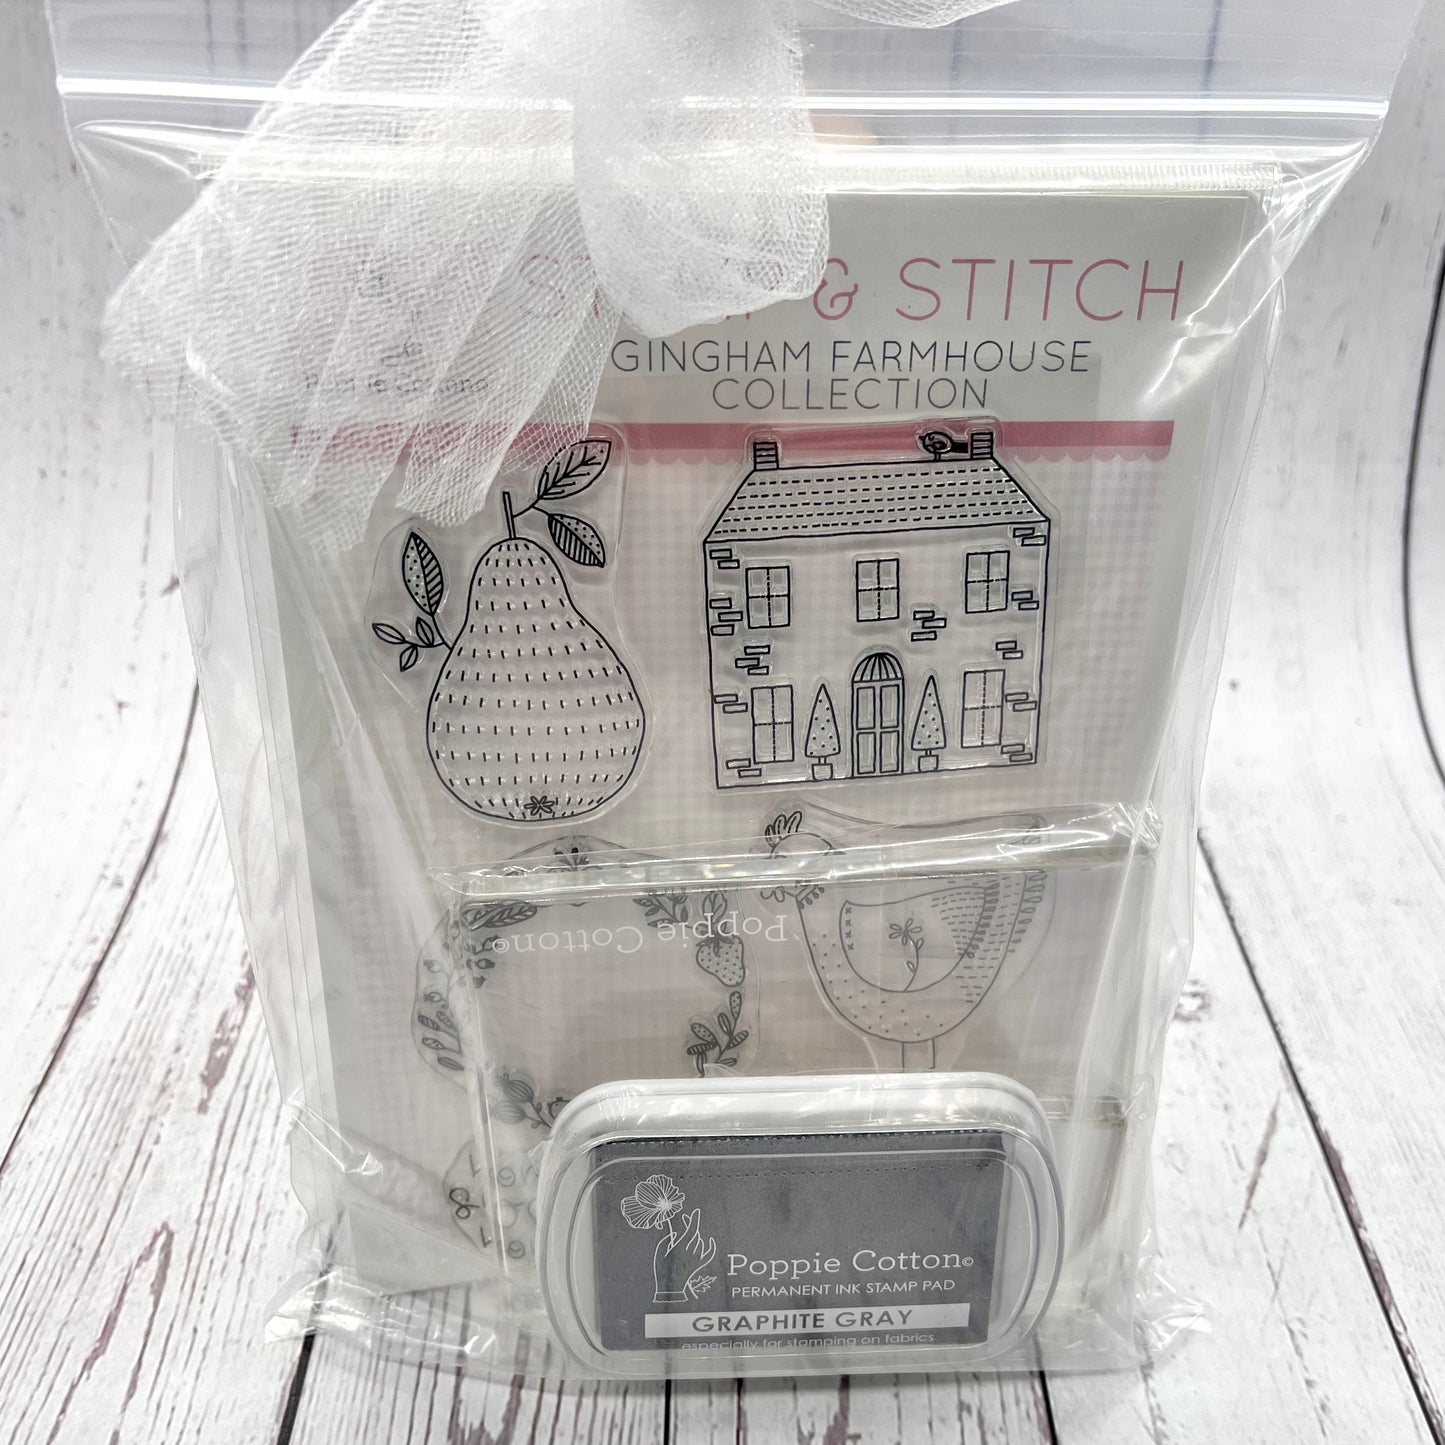 Stamp and Stitch Show Promo Packages, LIMITED QUANTITIES!